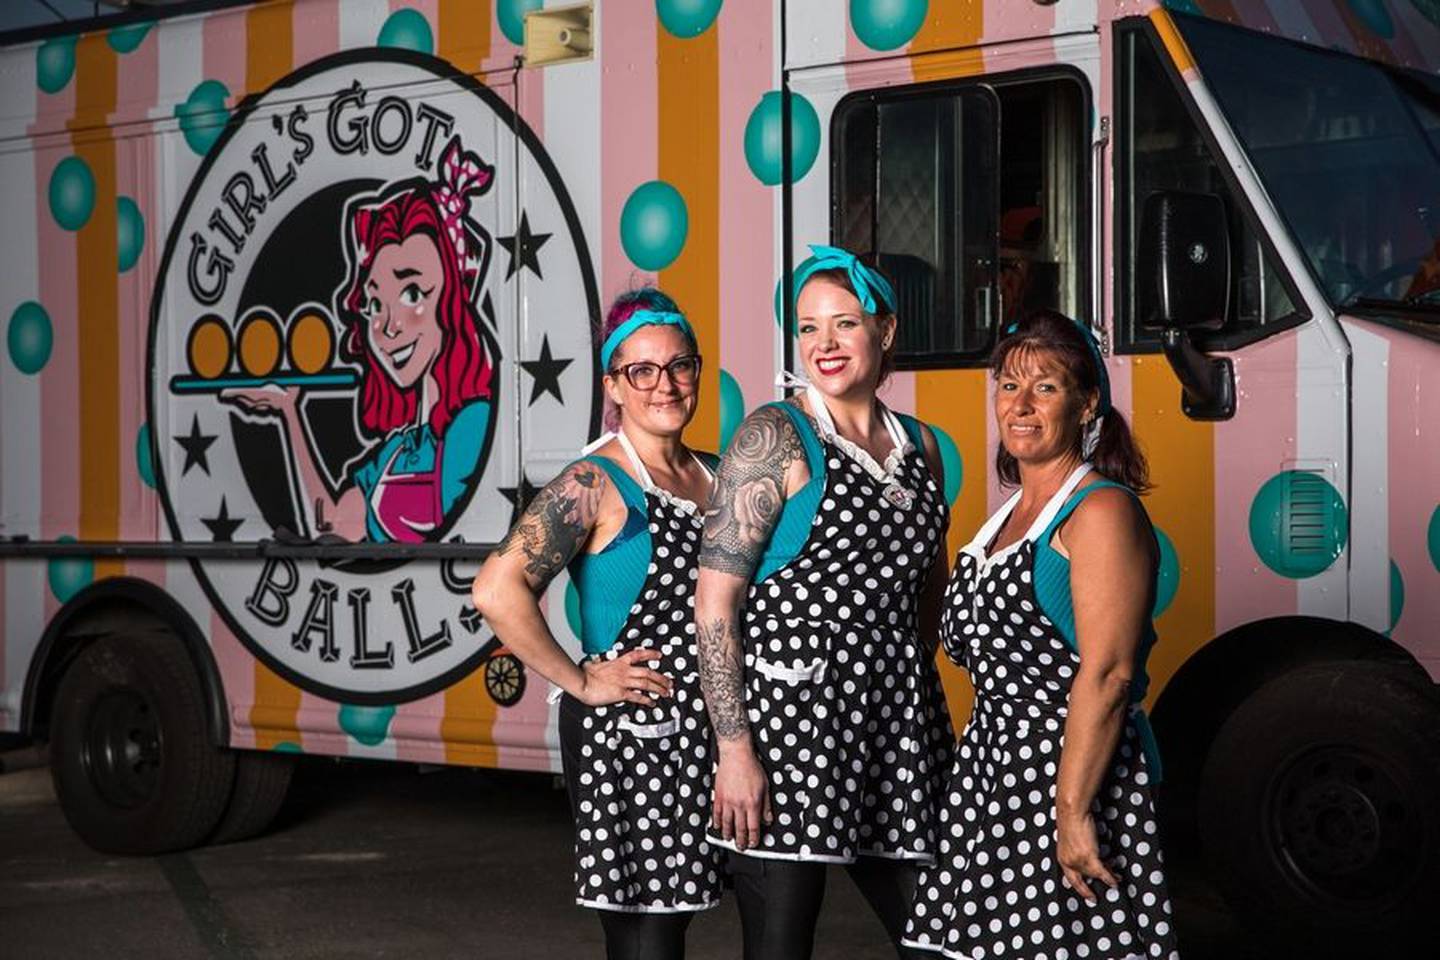 Shauna Fetterman, center, of Fox River Grove, and her teammates Lizzie Scudder, left, and Carrie Jones will compete on Food Network's "The Great Food Truck Race." The first episode of this season airs Sunday, June 5, 2022.